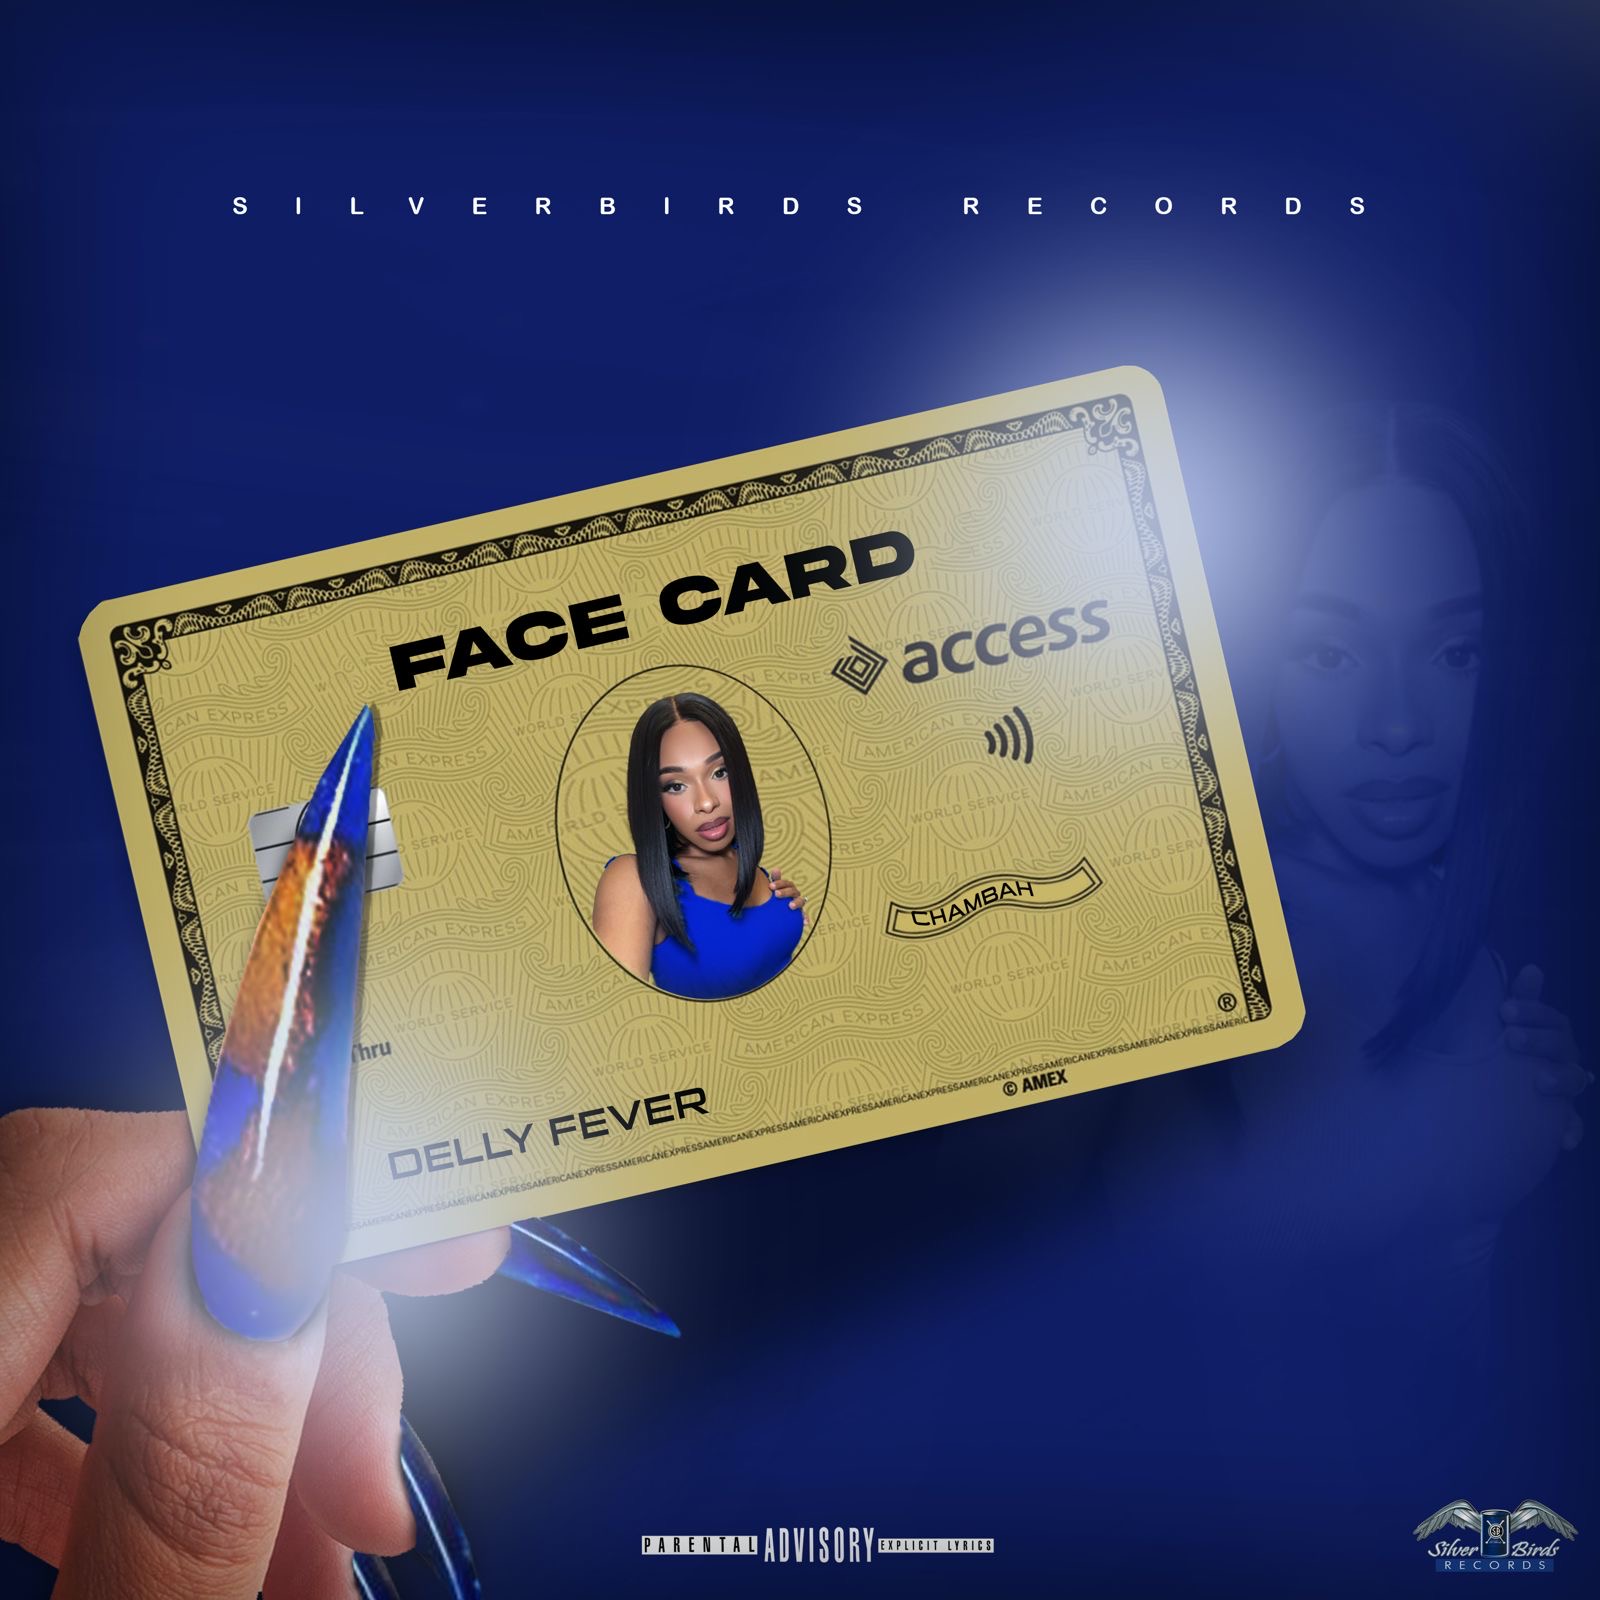 Delly Fever’s “Face Card” becomes her first top 20 hit